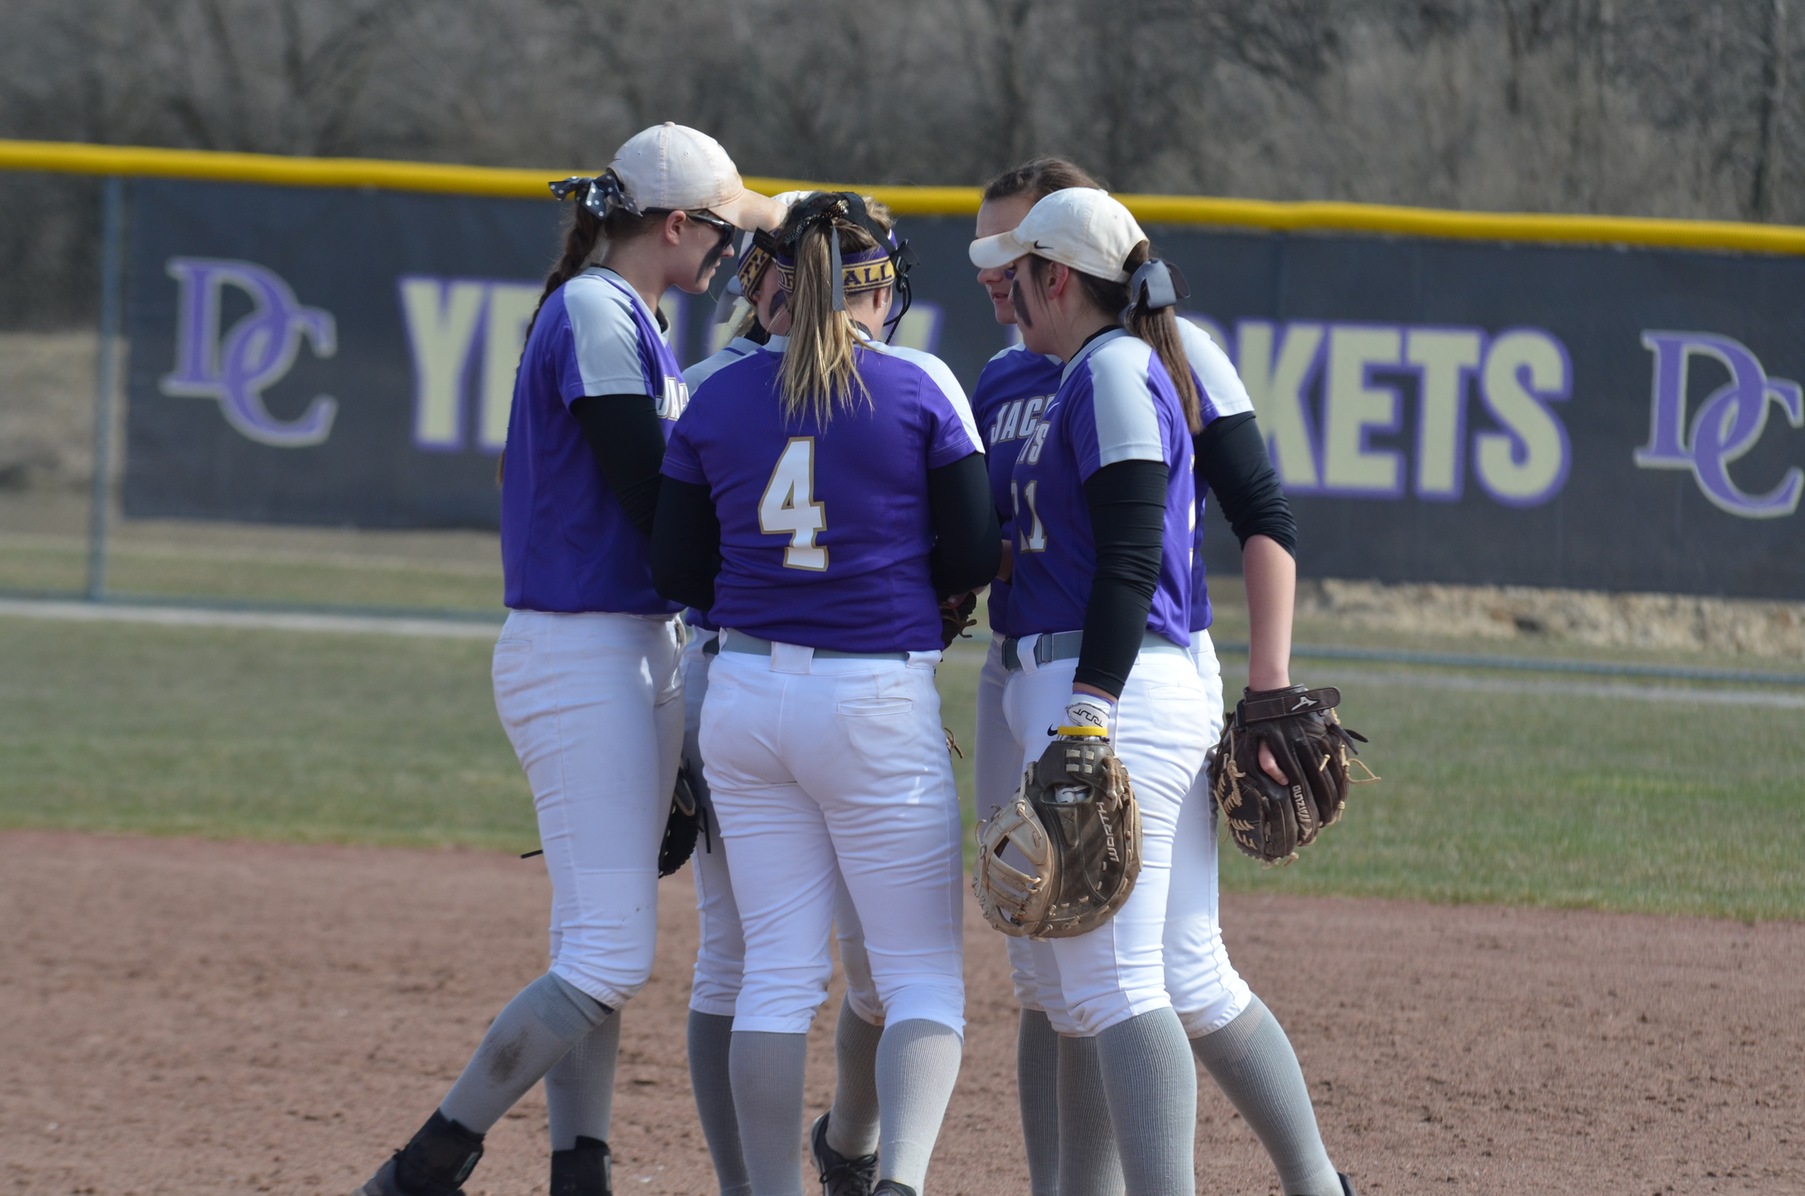 Defiance Ready for HCAC Tournament Run